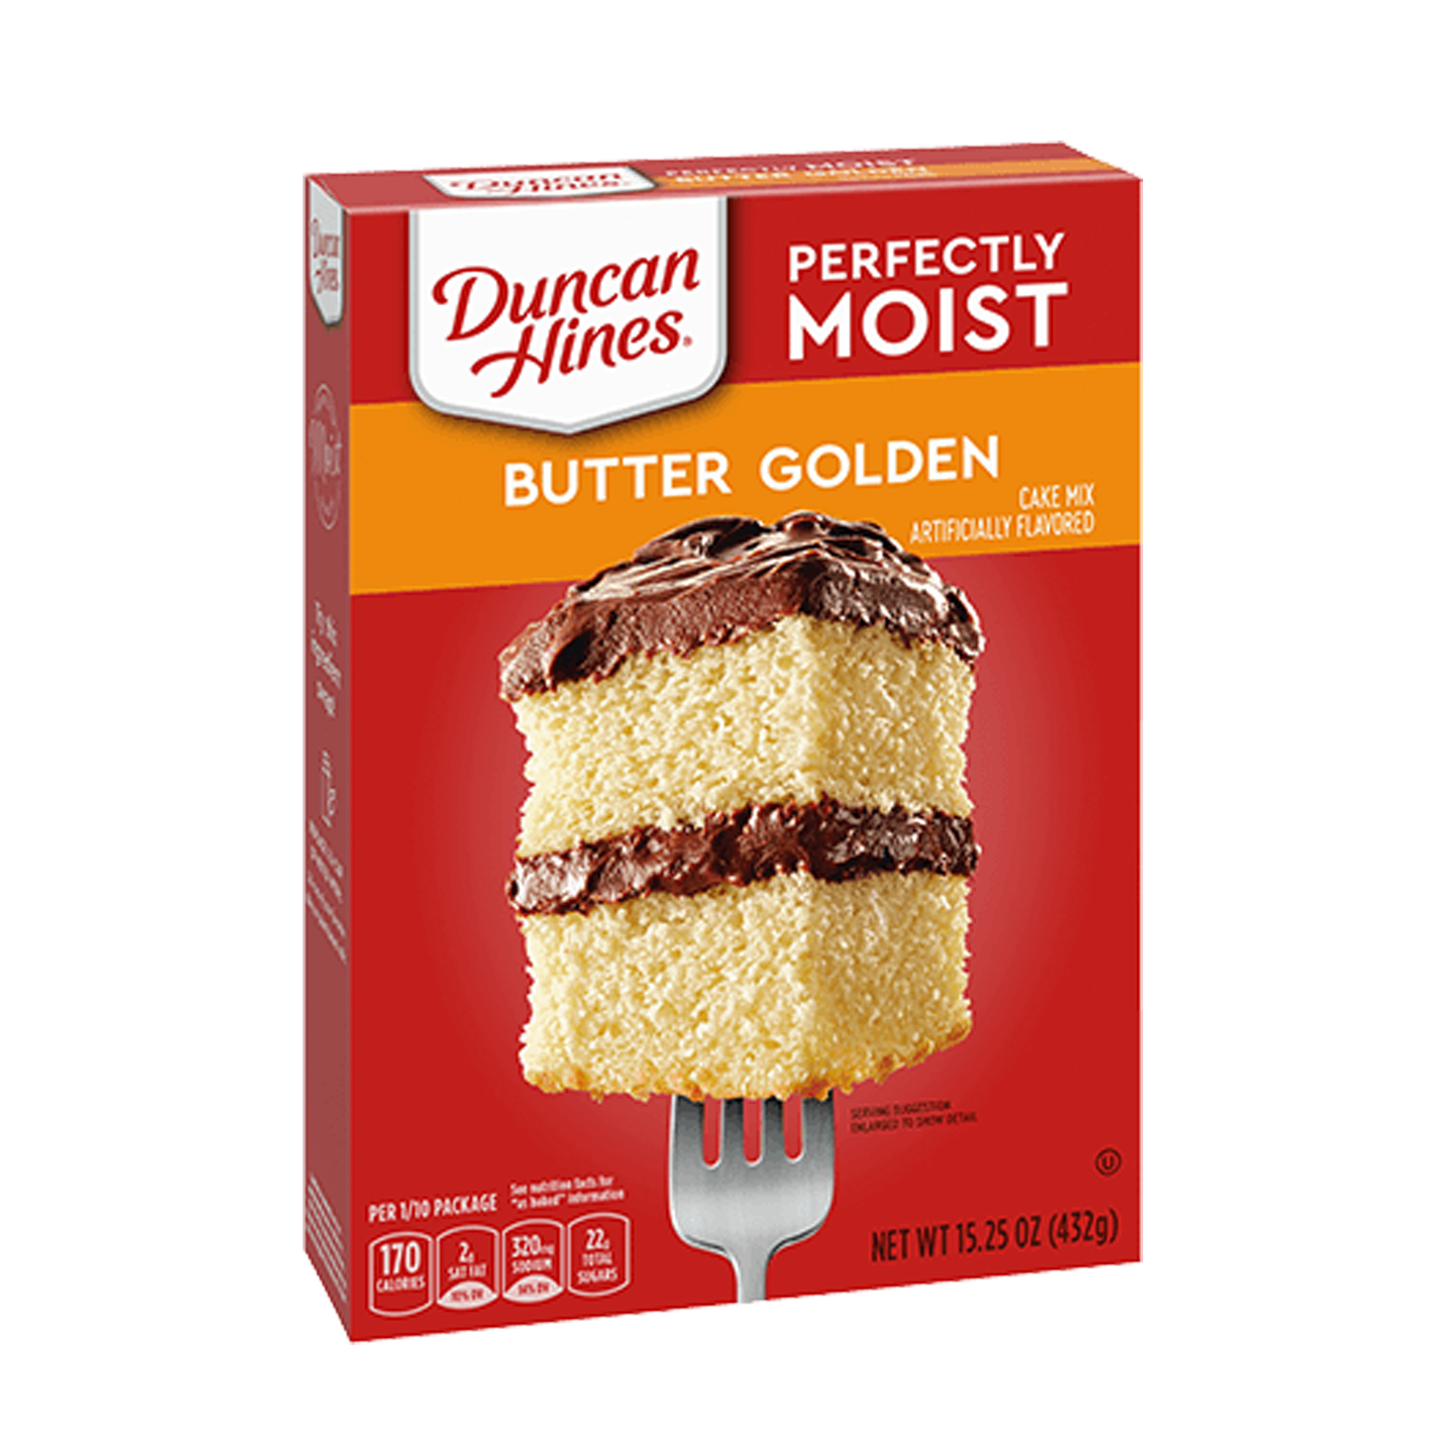 Duncan Hines Classic Butter Golden Cake Mix 432g sold by American grocer Uk